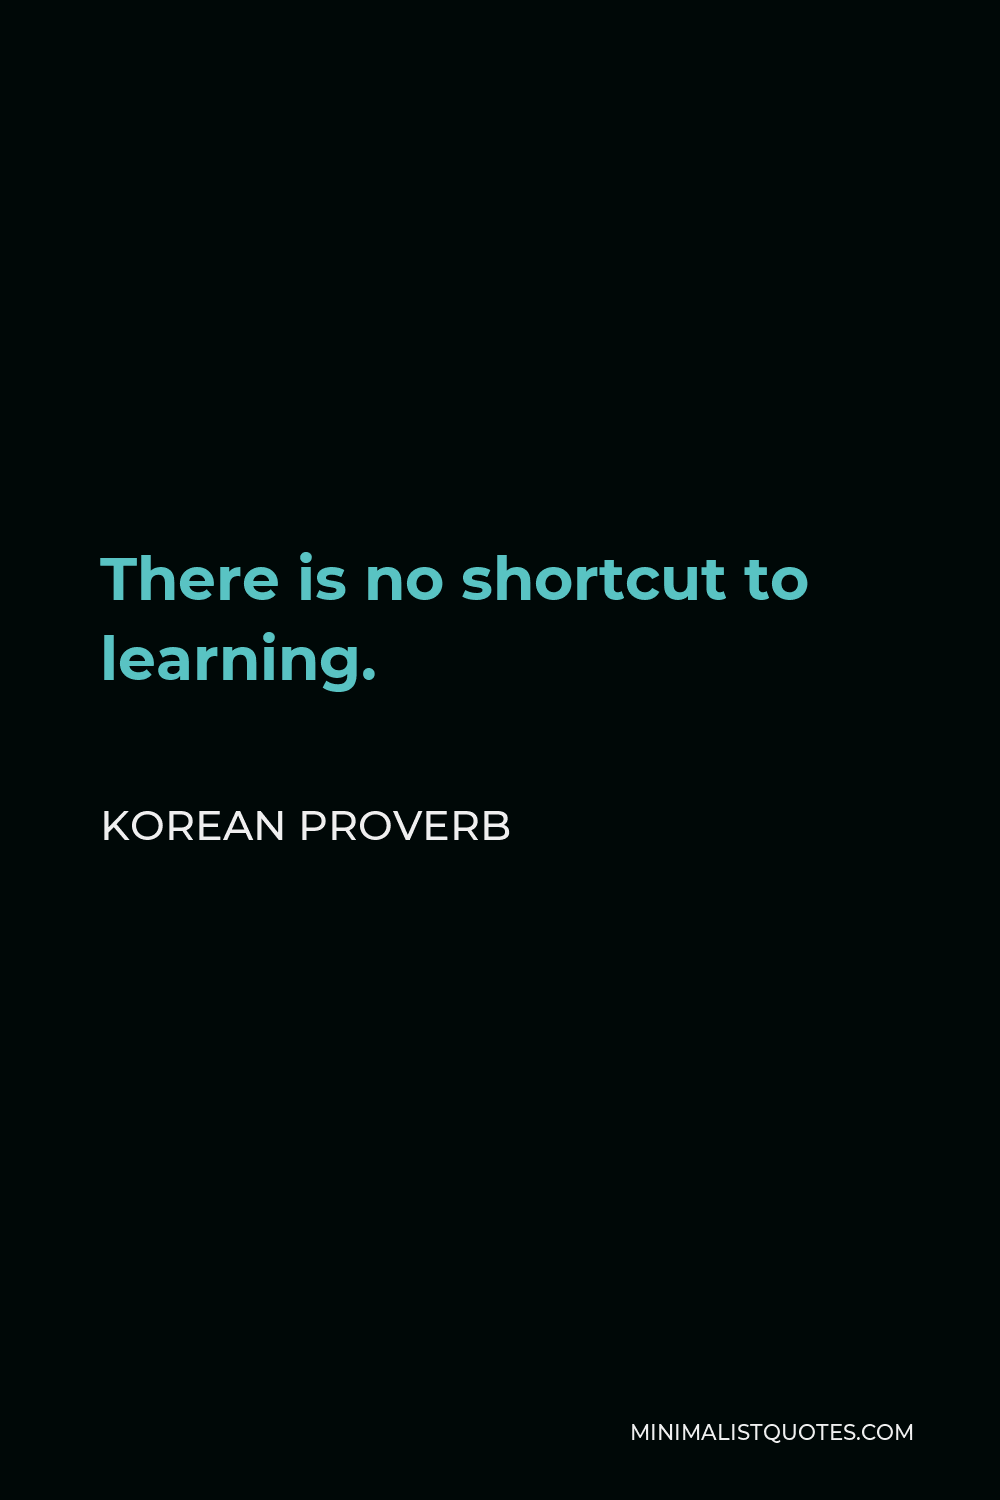 Korean Proverb Quote - There is no shortcut to learning.